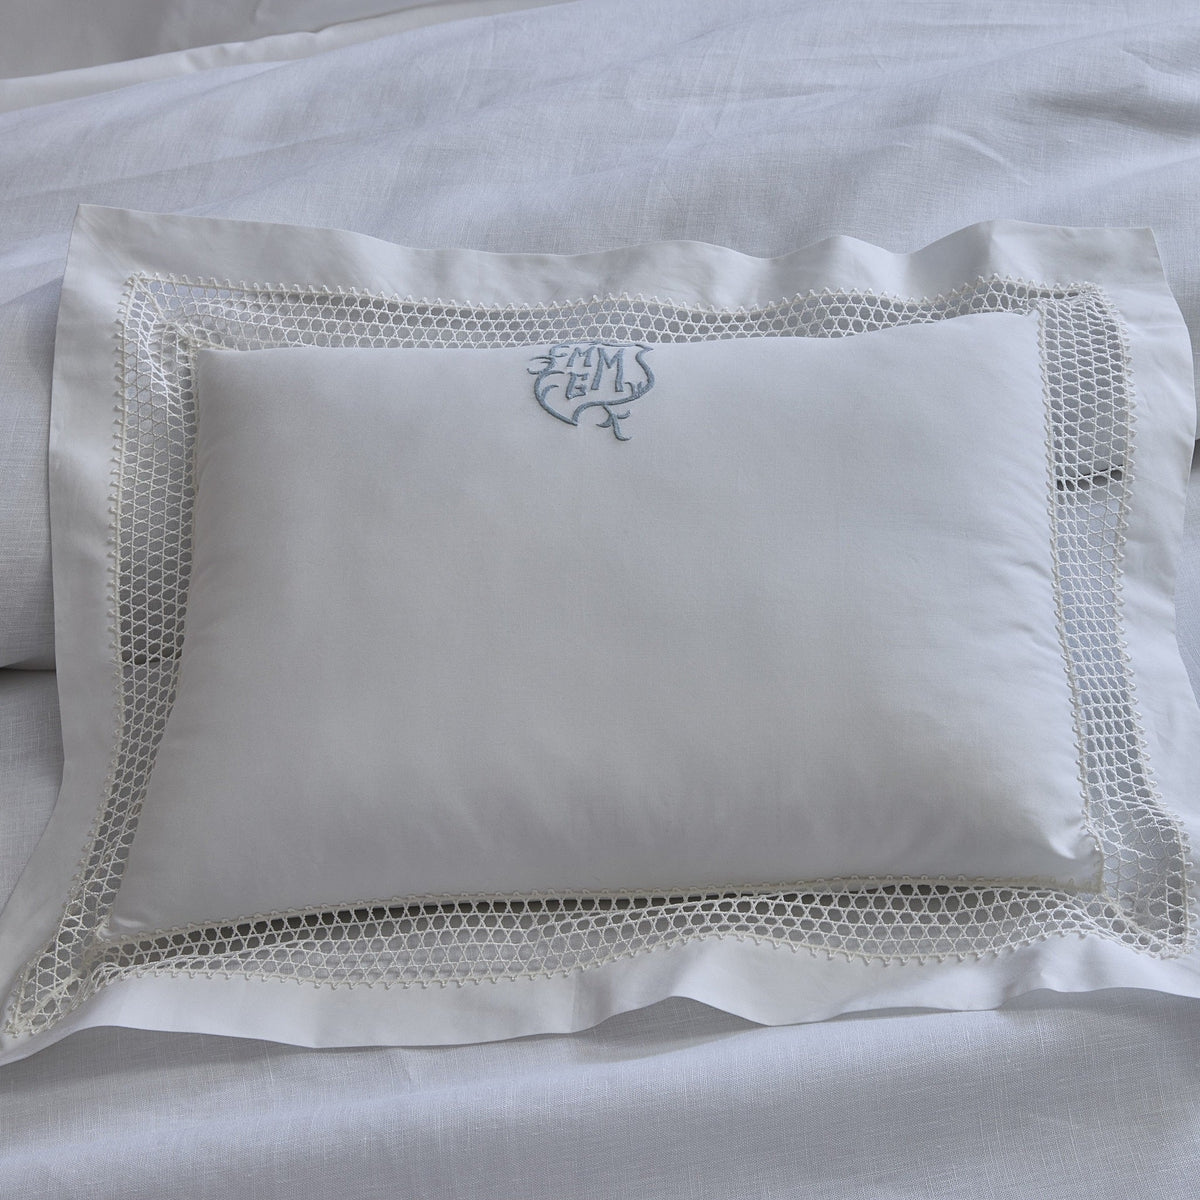 Top View Image of Matouk Cecily Bedding in White Color